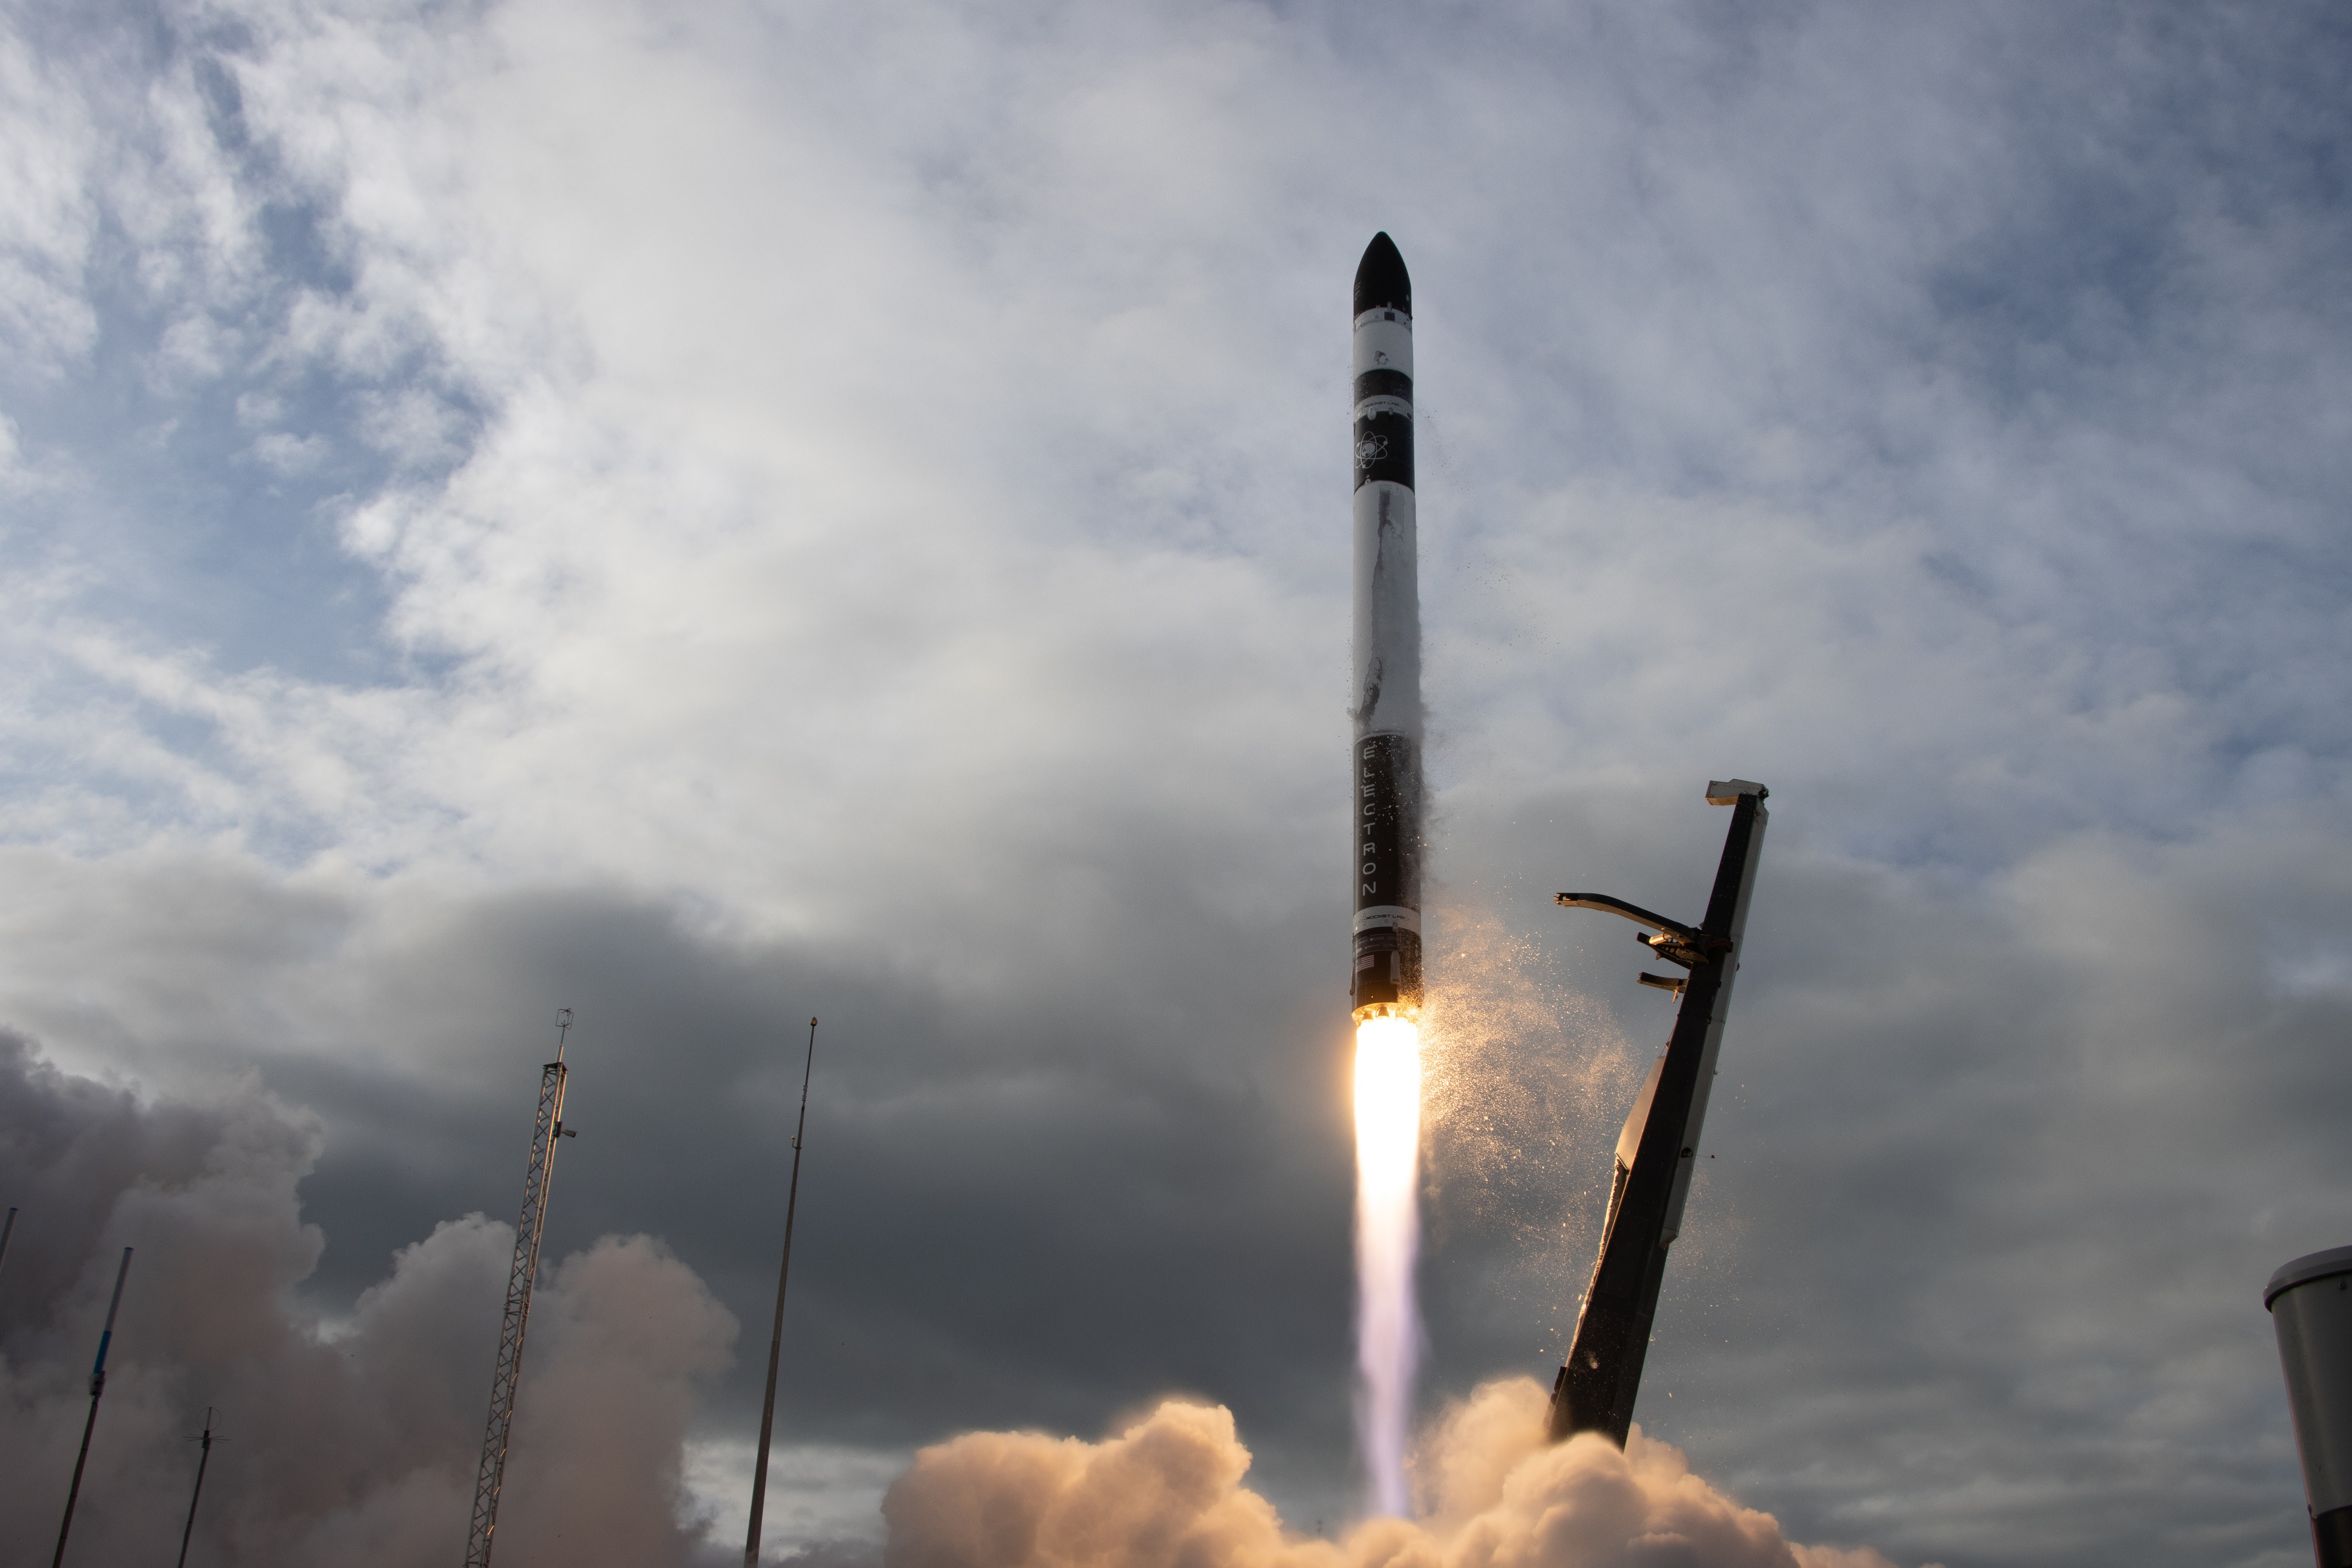 Rocket Lab will resume Electron launches in August after July 4 failure #rwanda #RwOT #yks2020